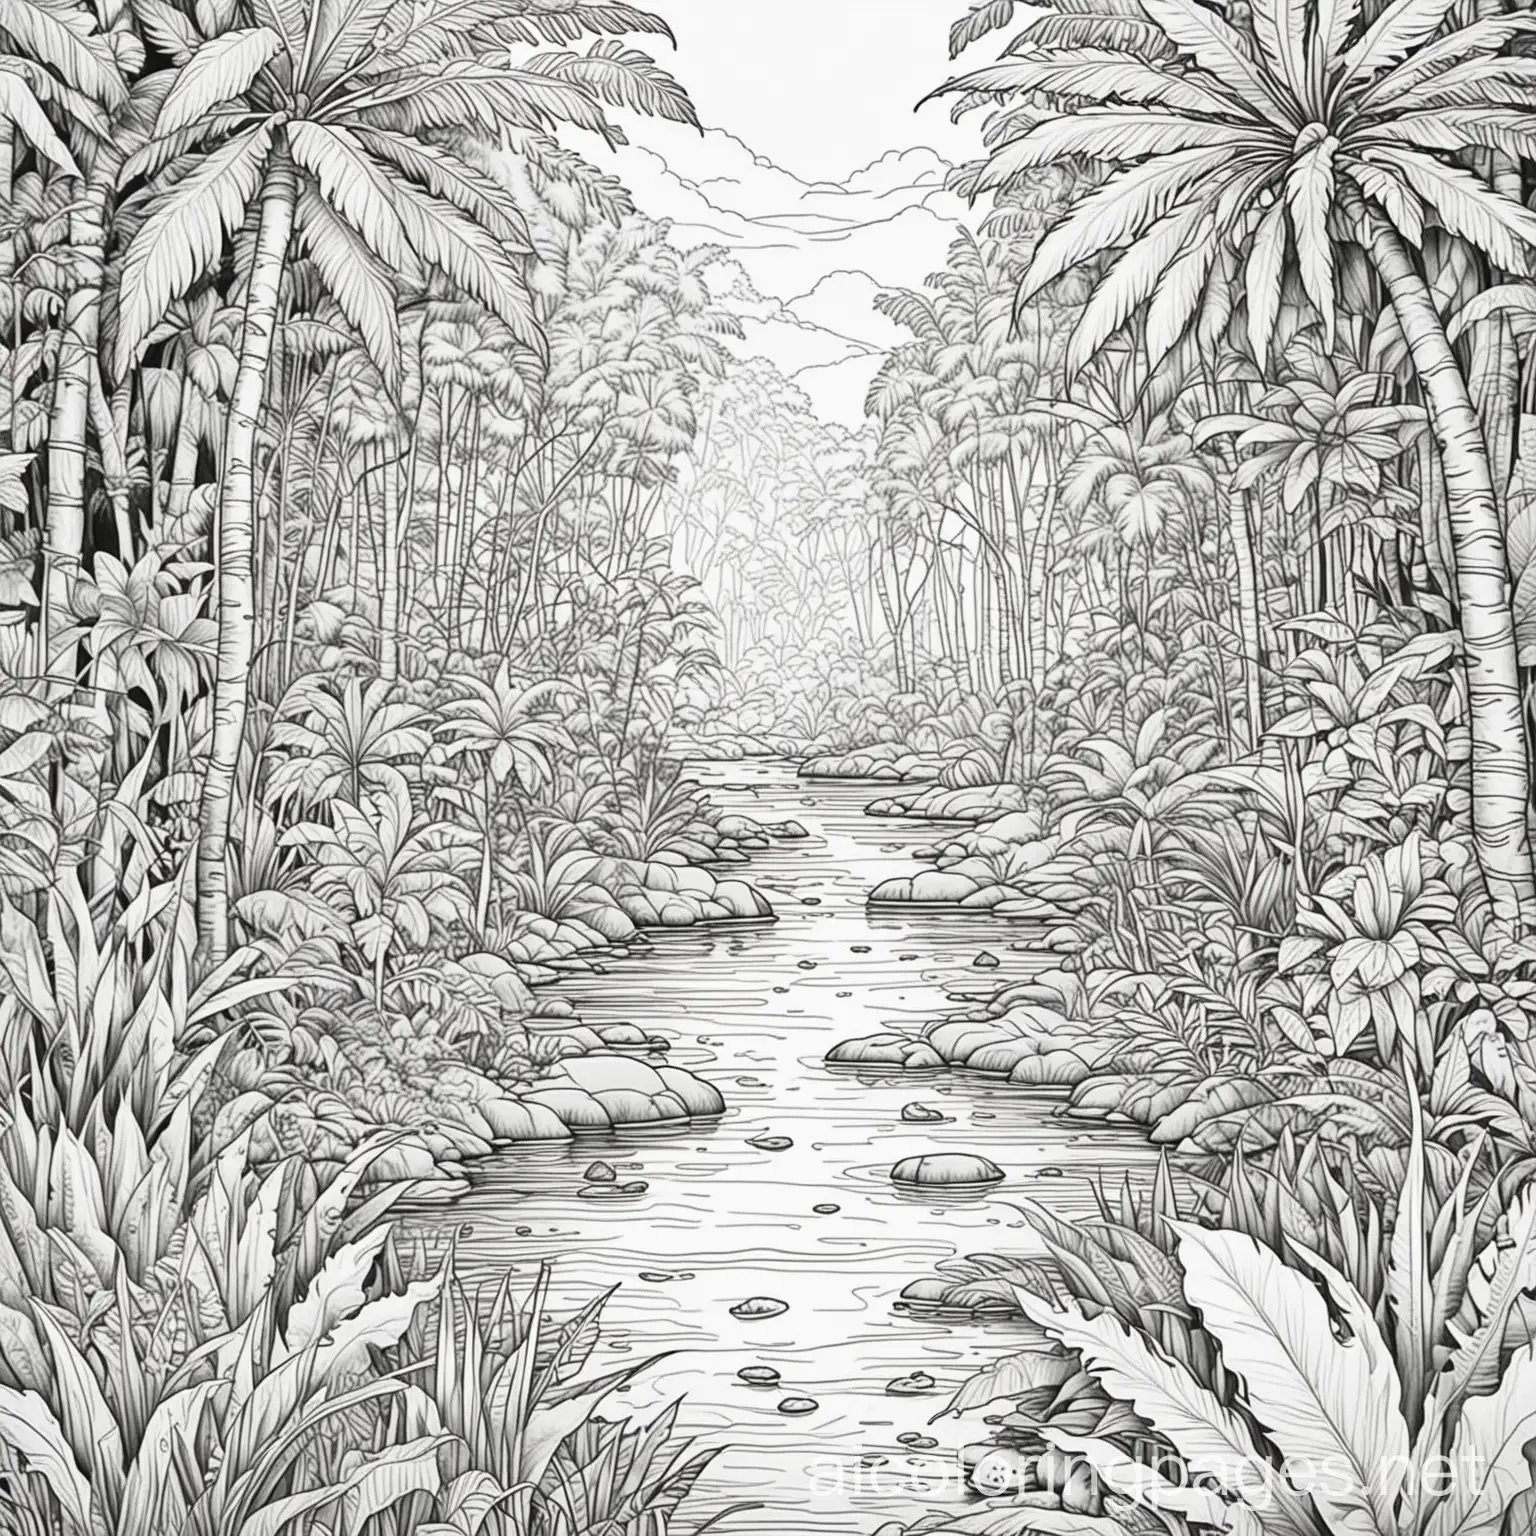 Jungle, water, gold, Coloring Page, black and white, line art, white background, Simplicity, Ample White Space. The background of the coloring page is plain white to make it easy for young children to color within the lines. The outlines of all the subjects are easy to distinguish, making it simple for kids to color without too much difficulty